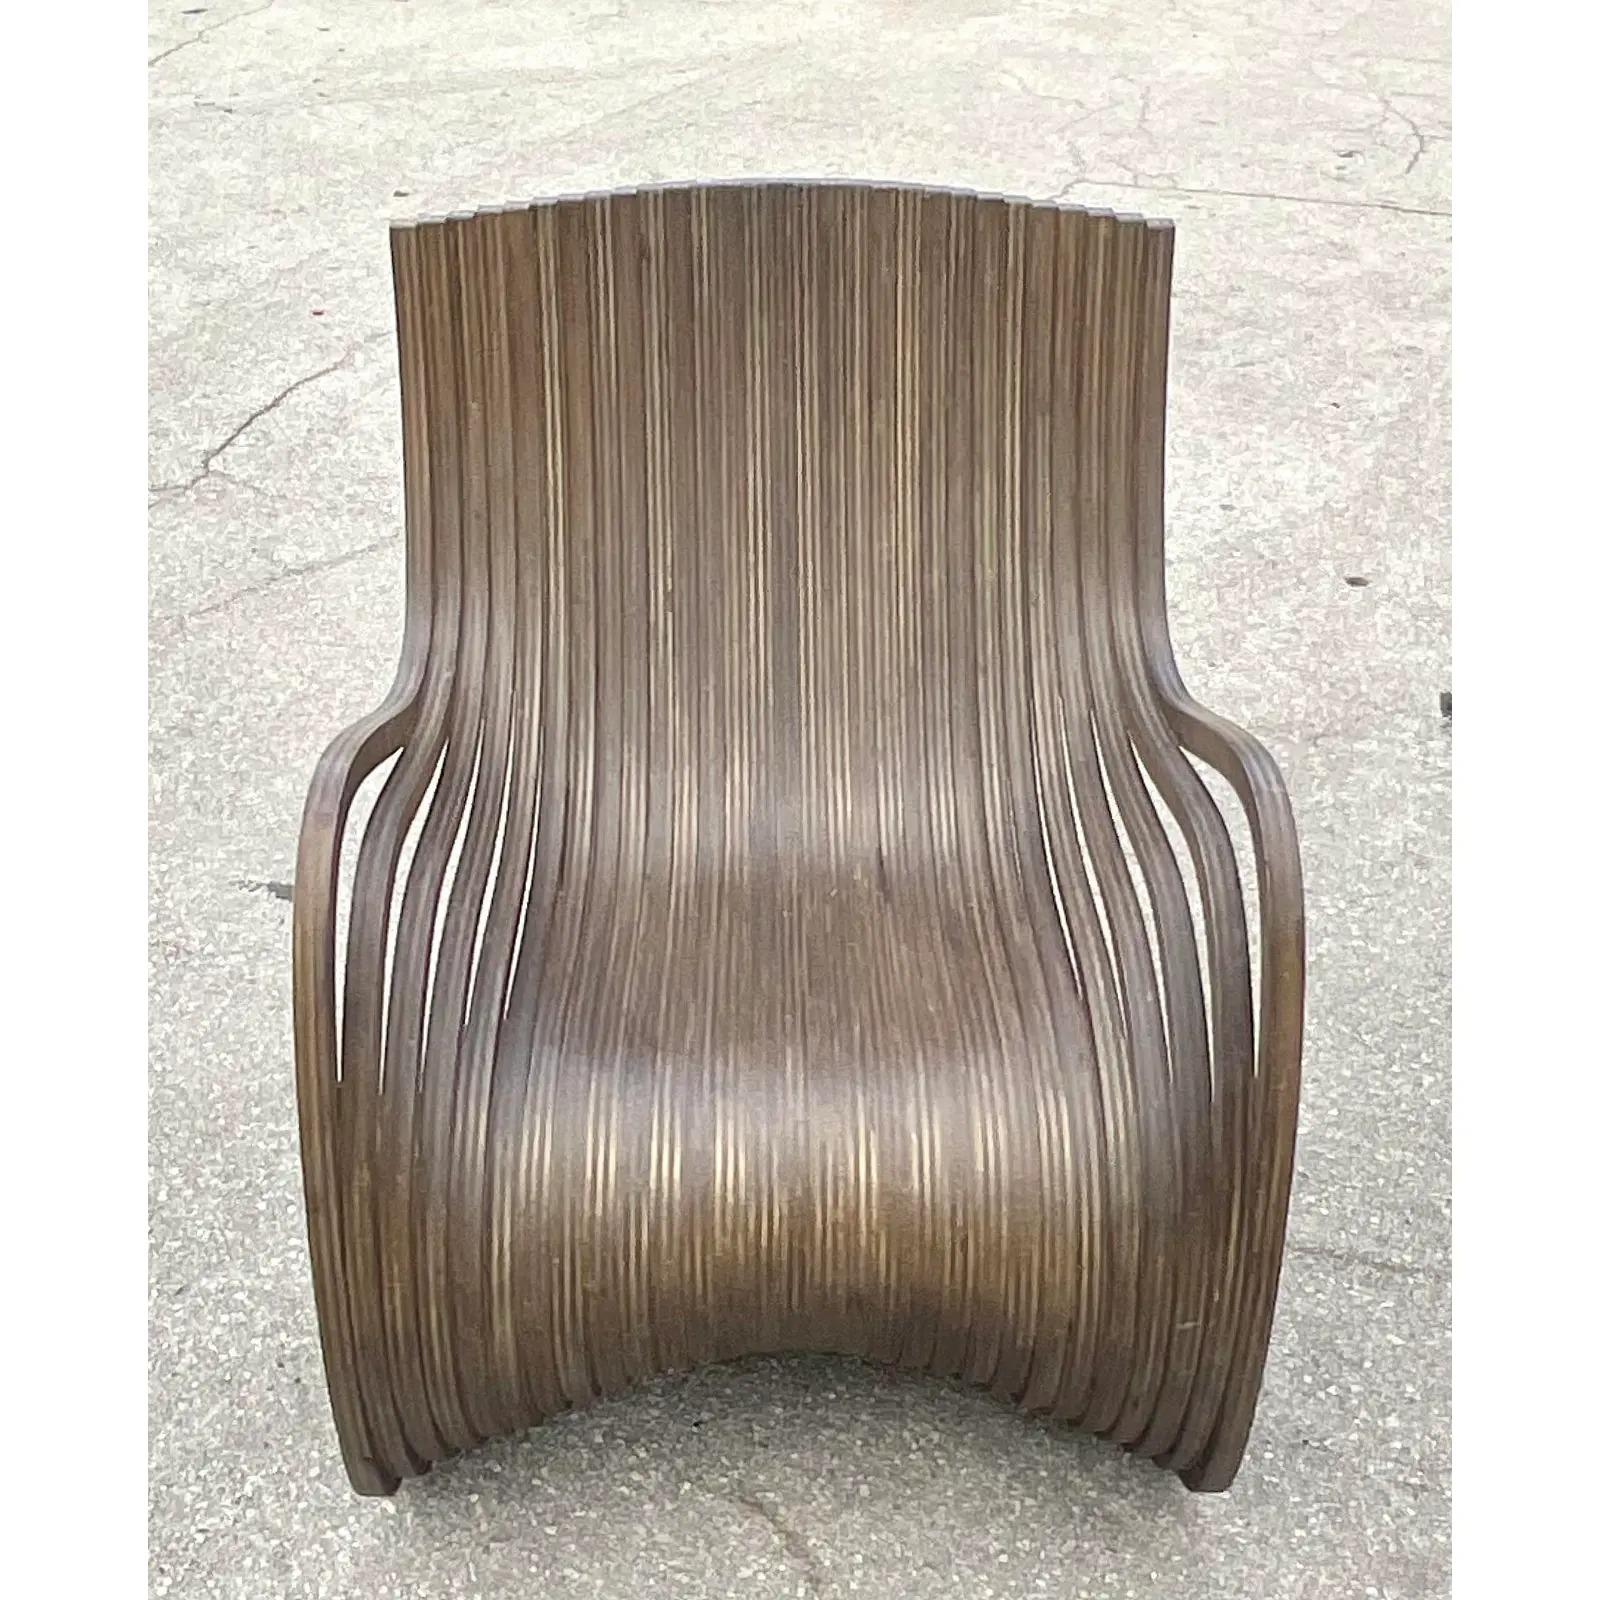 20th Century Vintage Contemporary Piegatto Pipo Wenge Wood Lounge Chair